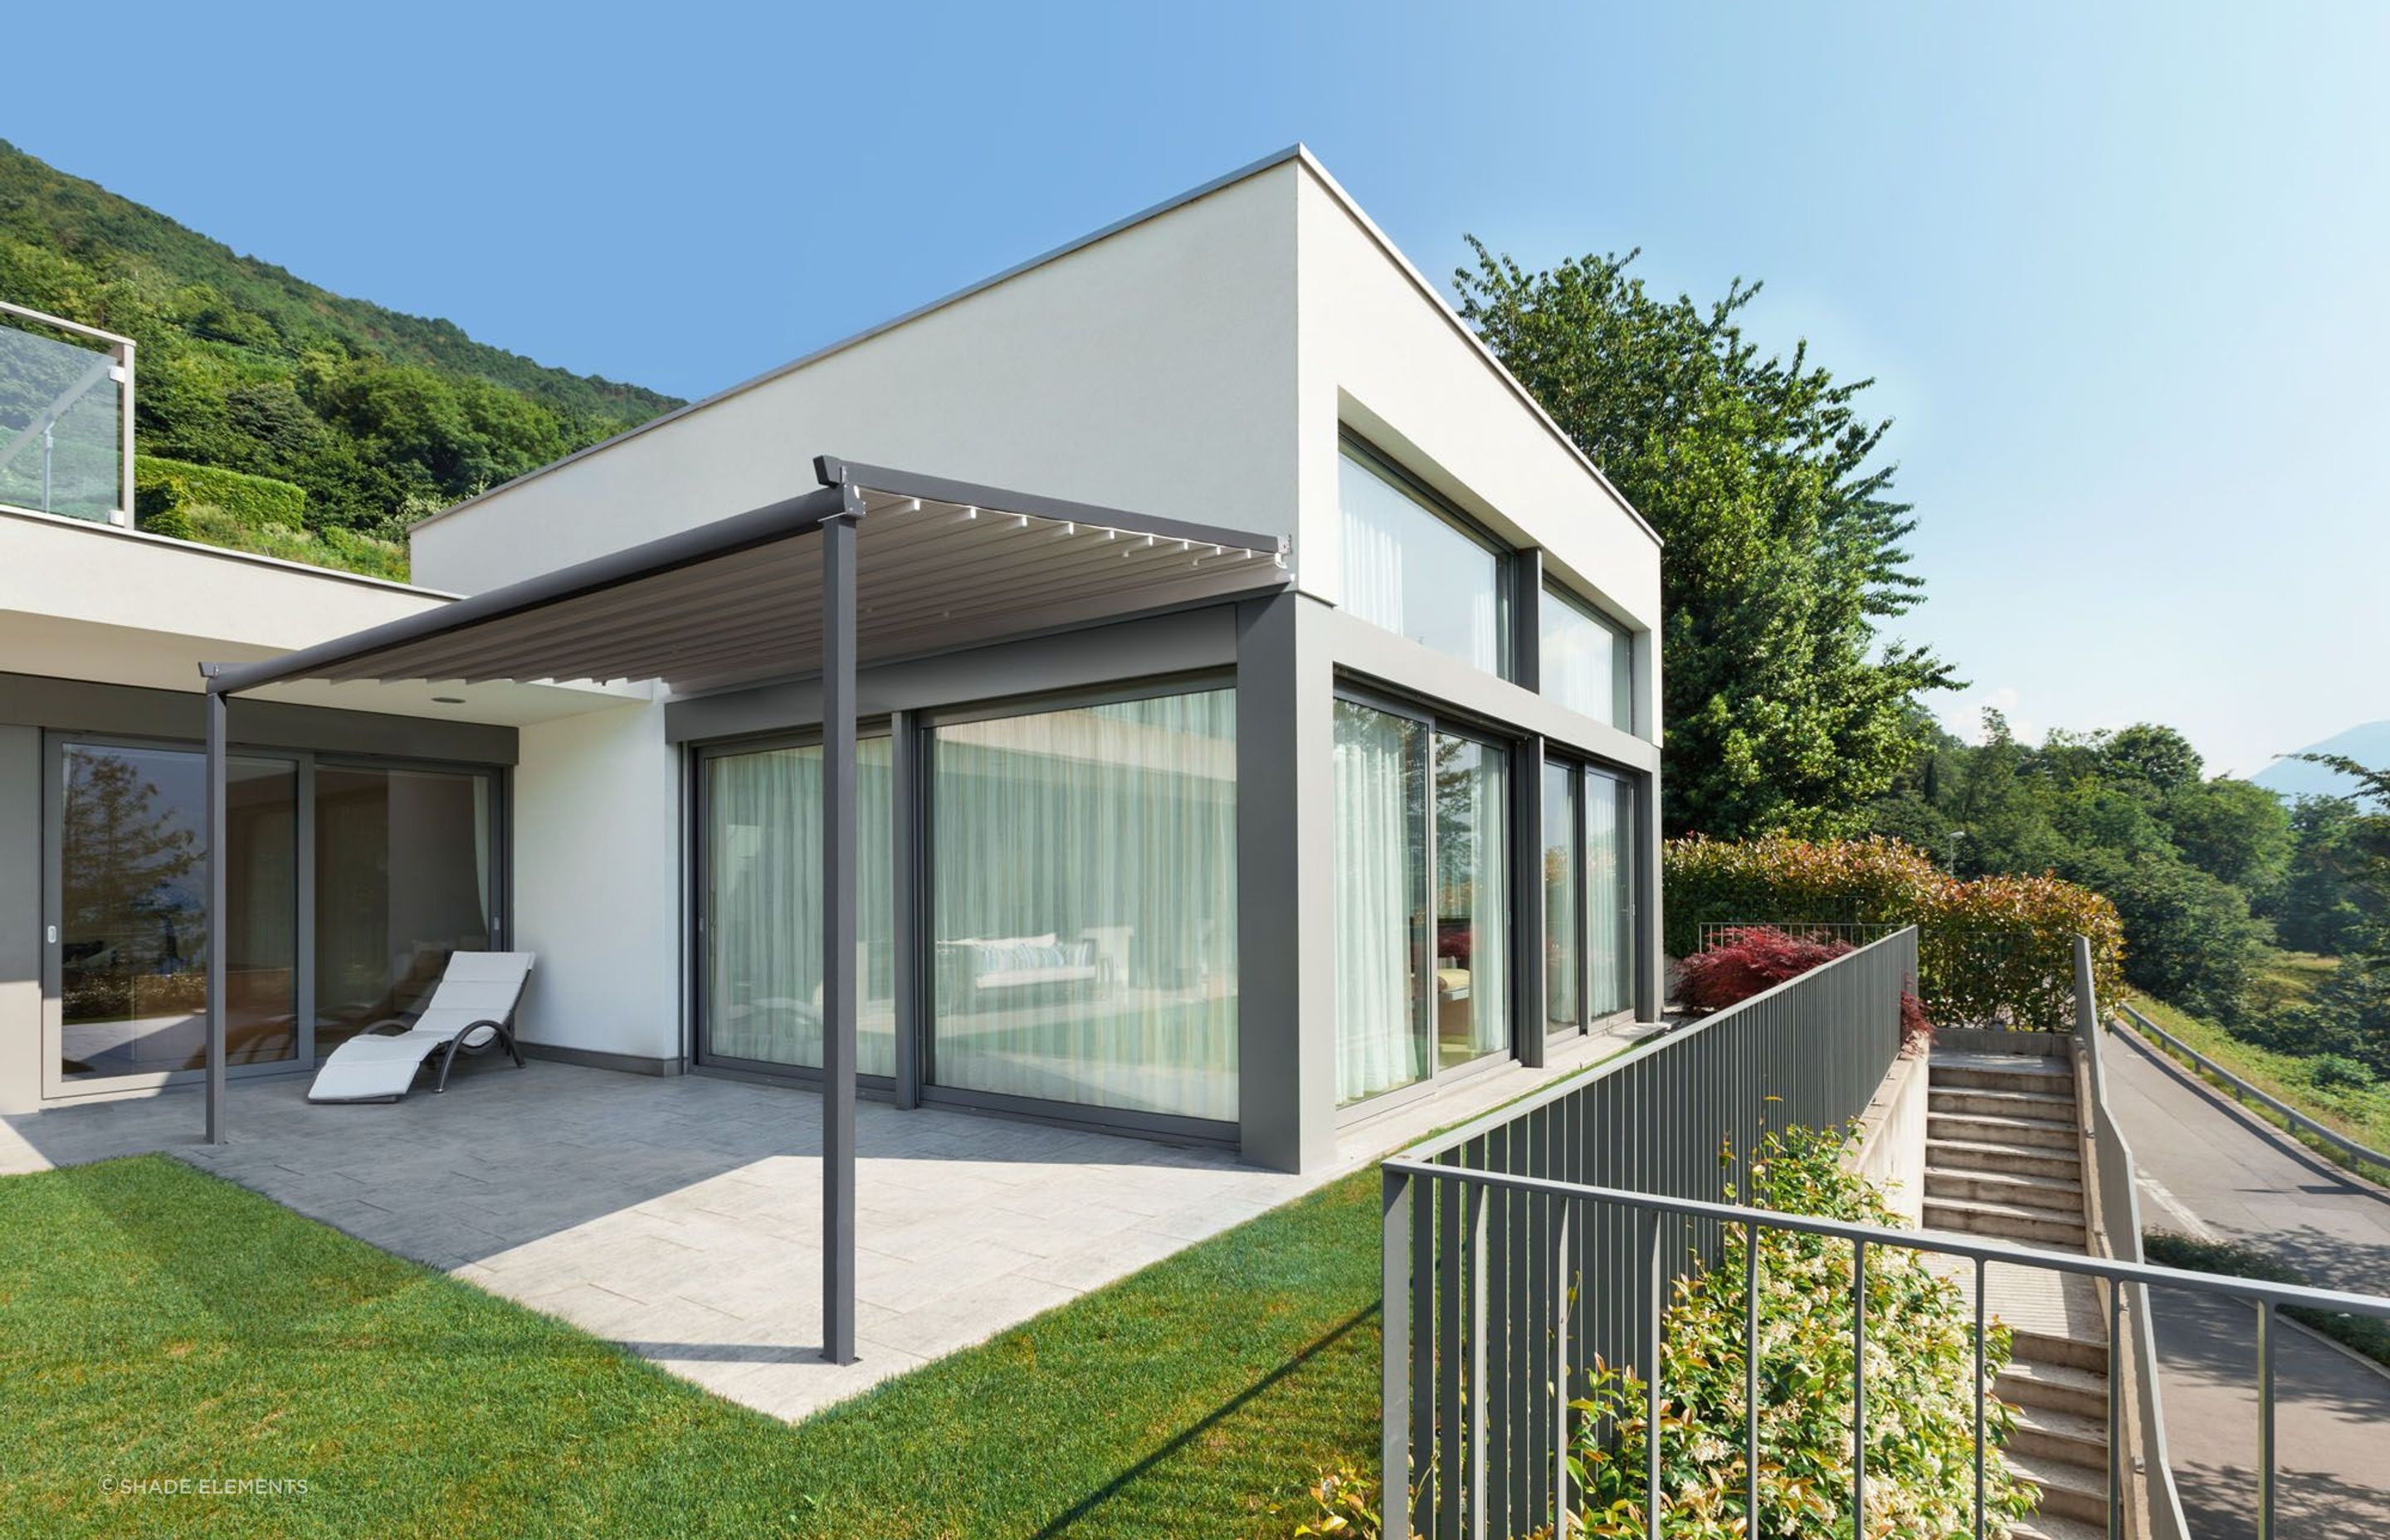 The Omega Retractable Pergola creates seamless indoor and outdoor flow, showcasing a different design style altogether